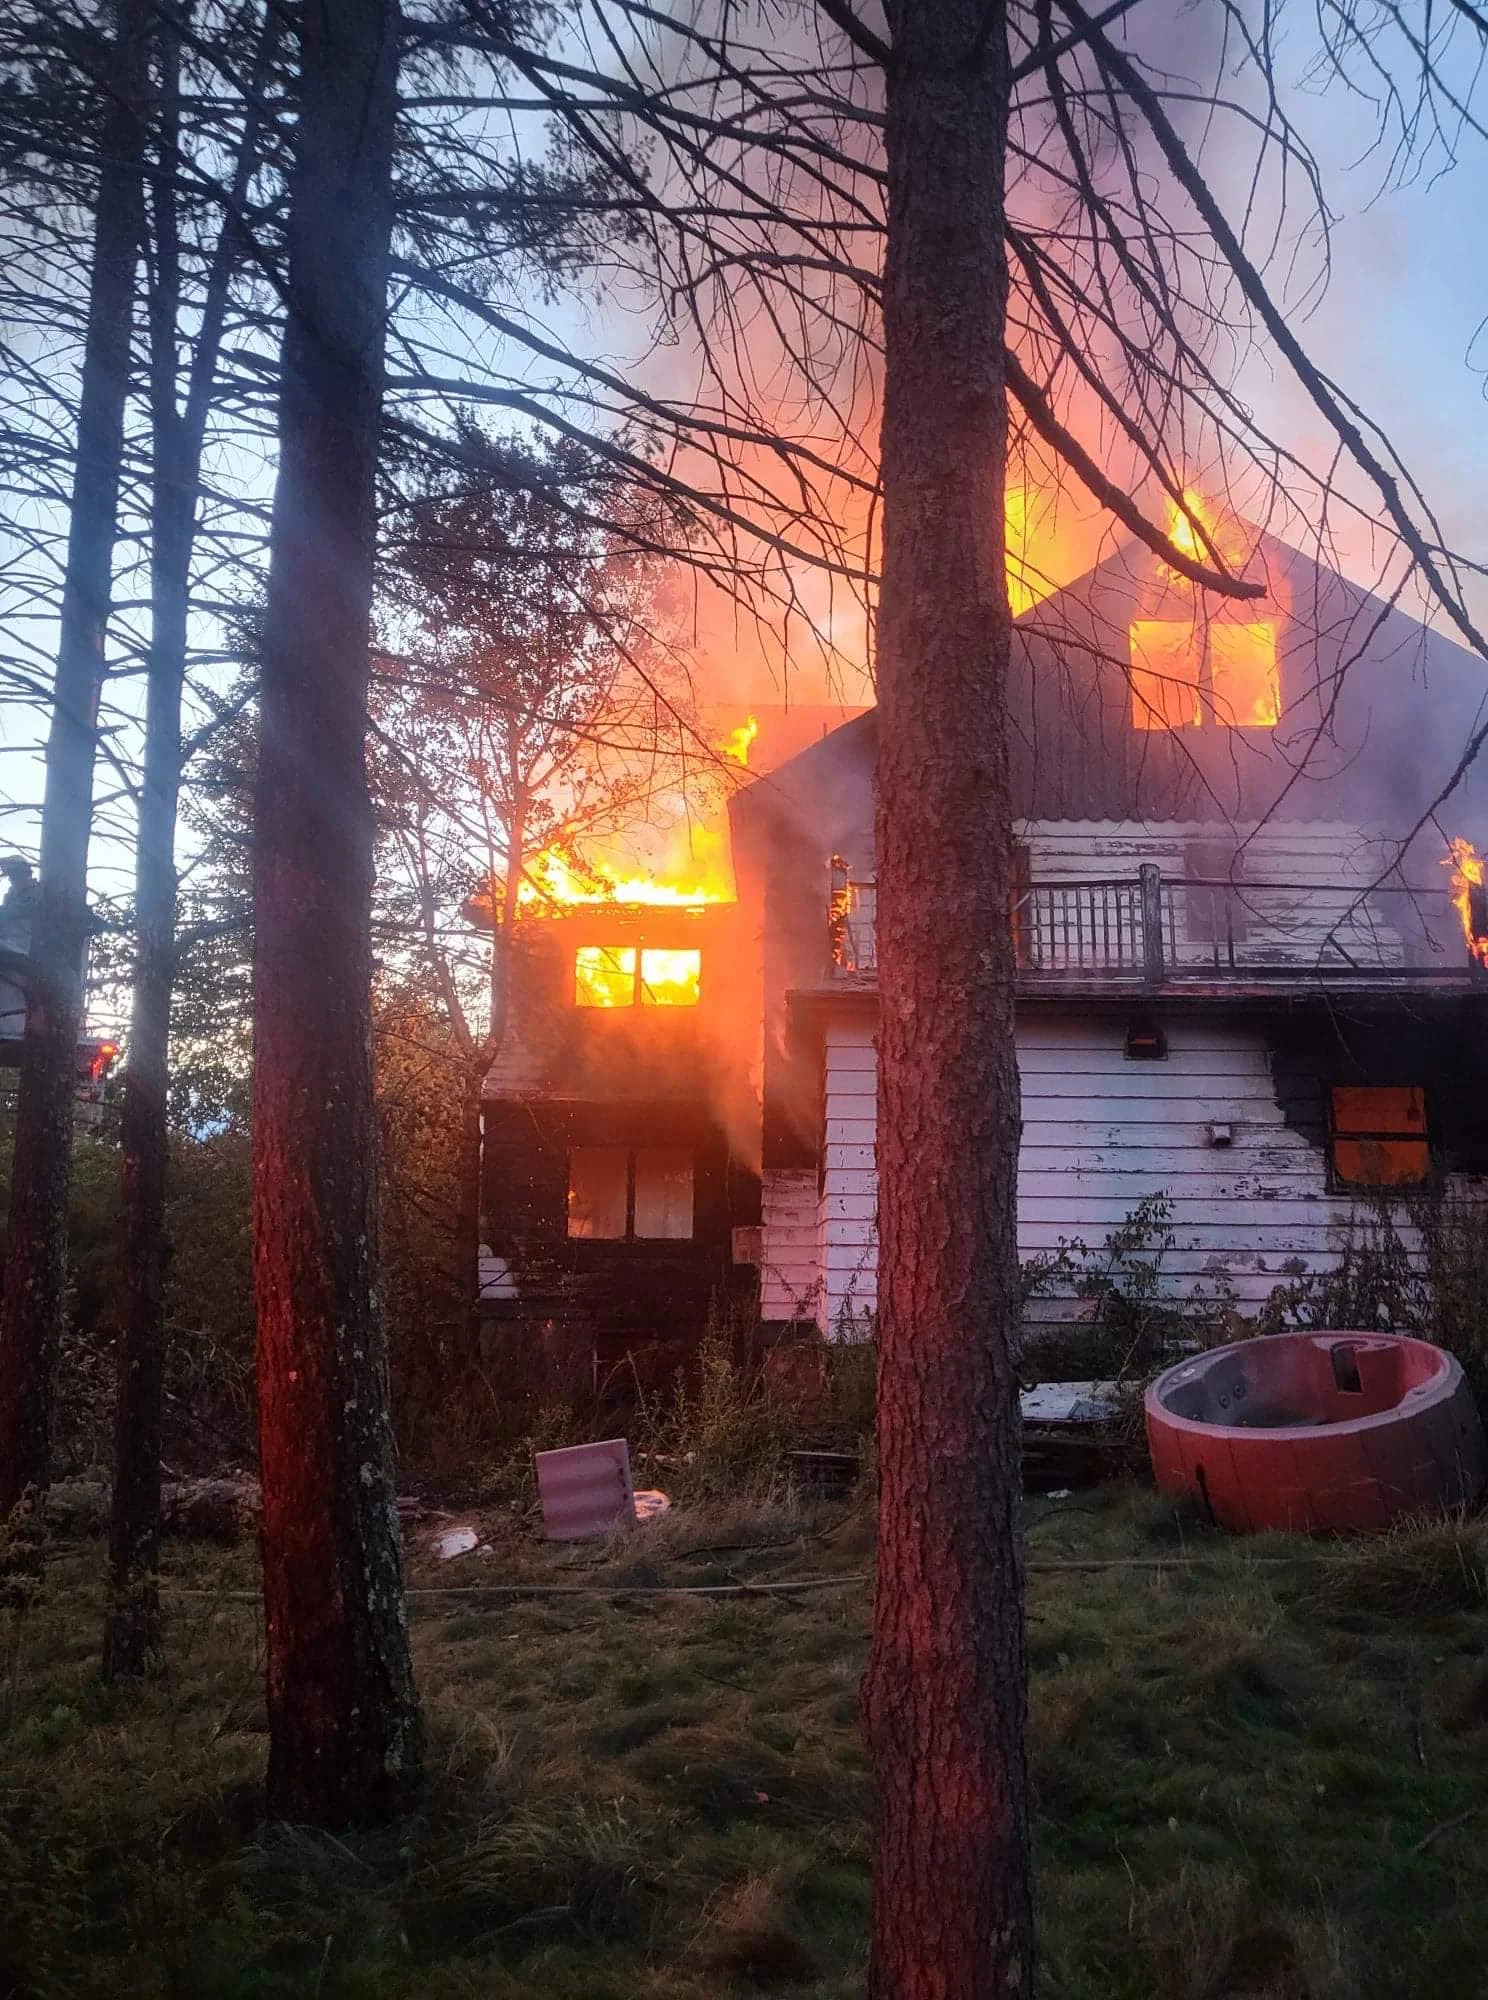 Upstate New York Hotel That Inspired Dirty Dancing Destroyed image pic